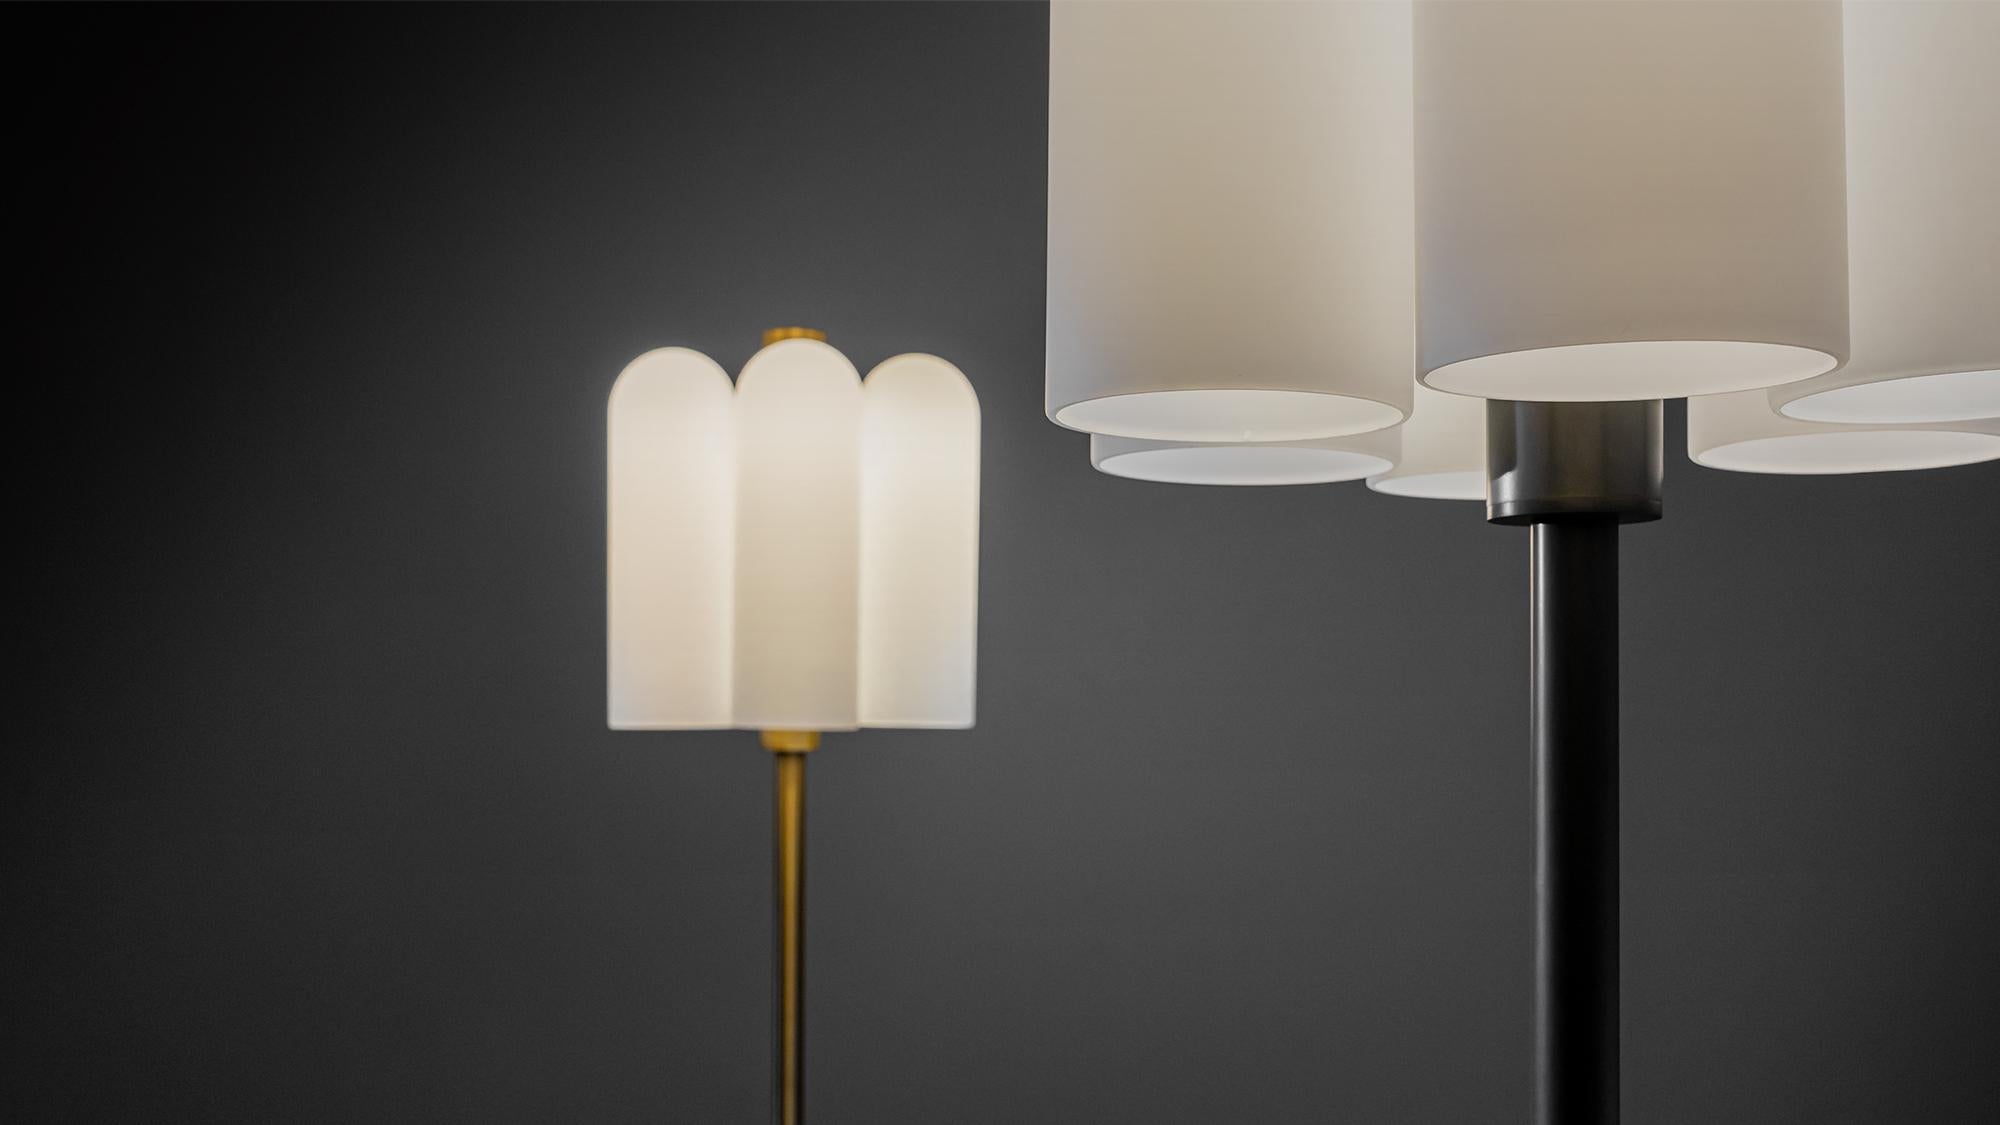 The Odyssey floor lamp is a striking symbol, creating an internal architecture. The sturdy base of this table lamp ensures a stable instrument. Six elongated cylinders provide a calming illumination.

Available in our three signature finishes: